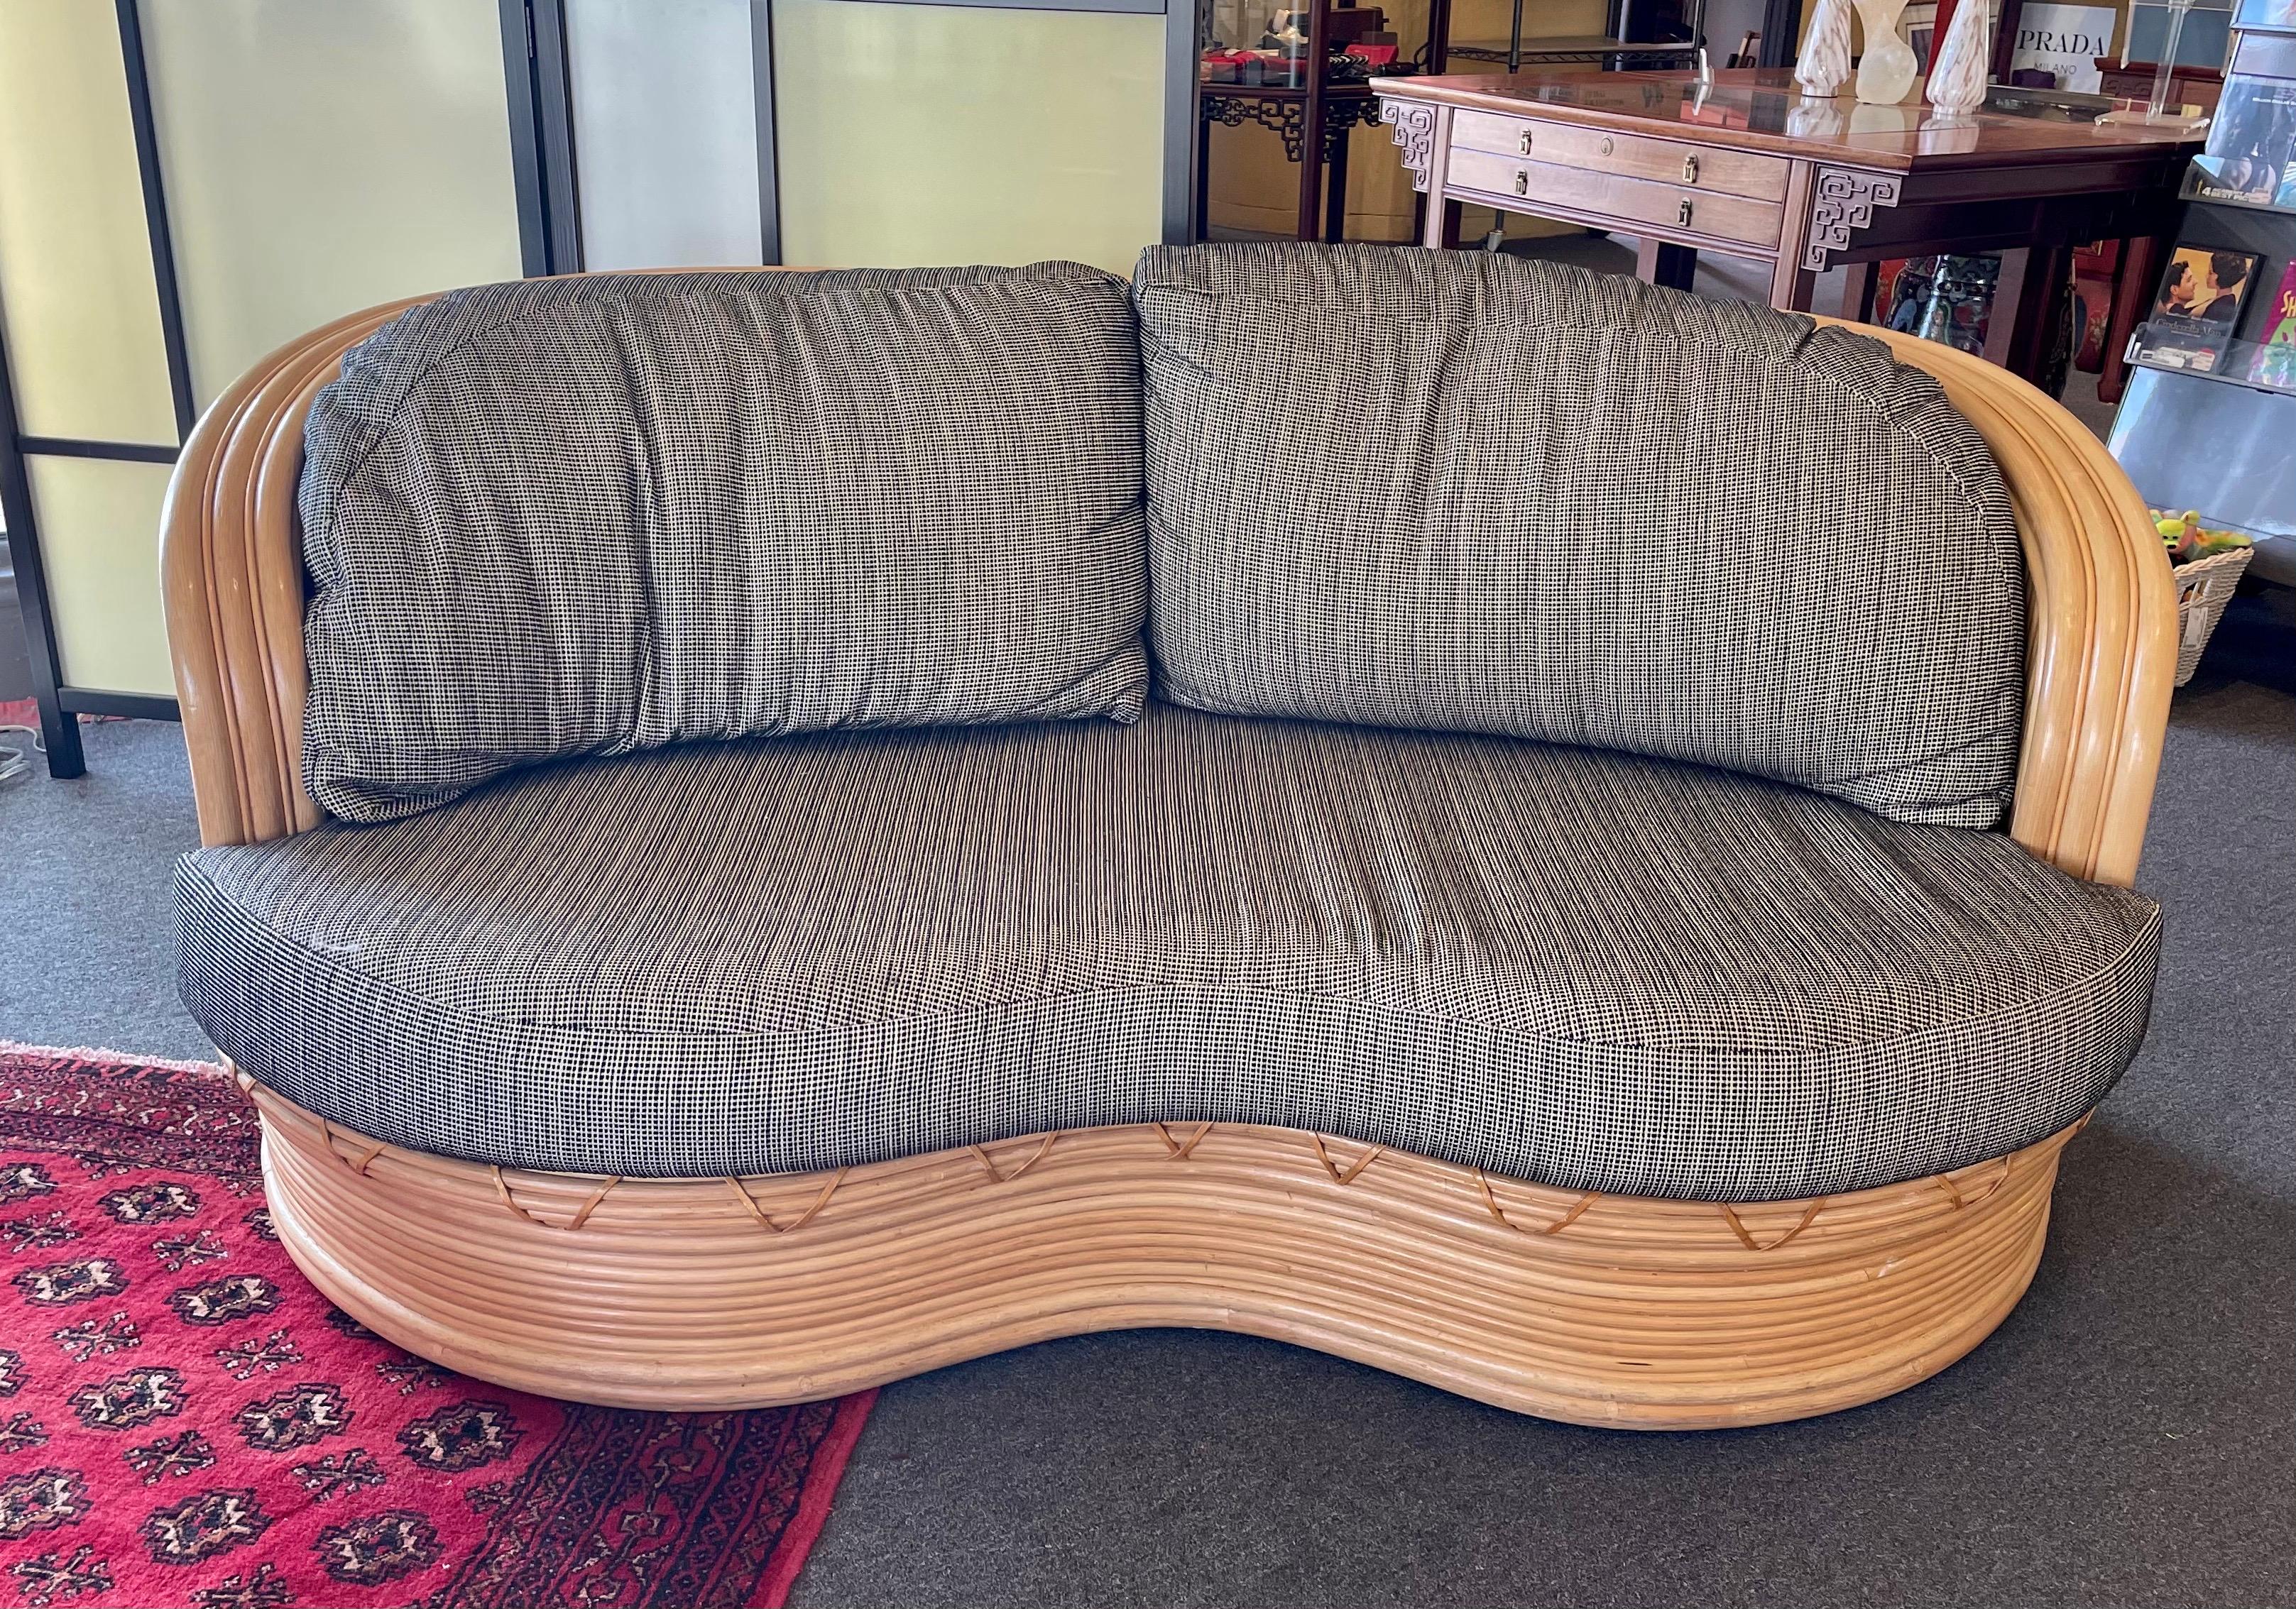 A great looking loveseat sofa pencil reed rattan freeform loveseat boho chic style, sculptural lines in Oasis sofa style great condition nicely upholstered, and good clean condition.